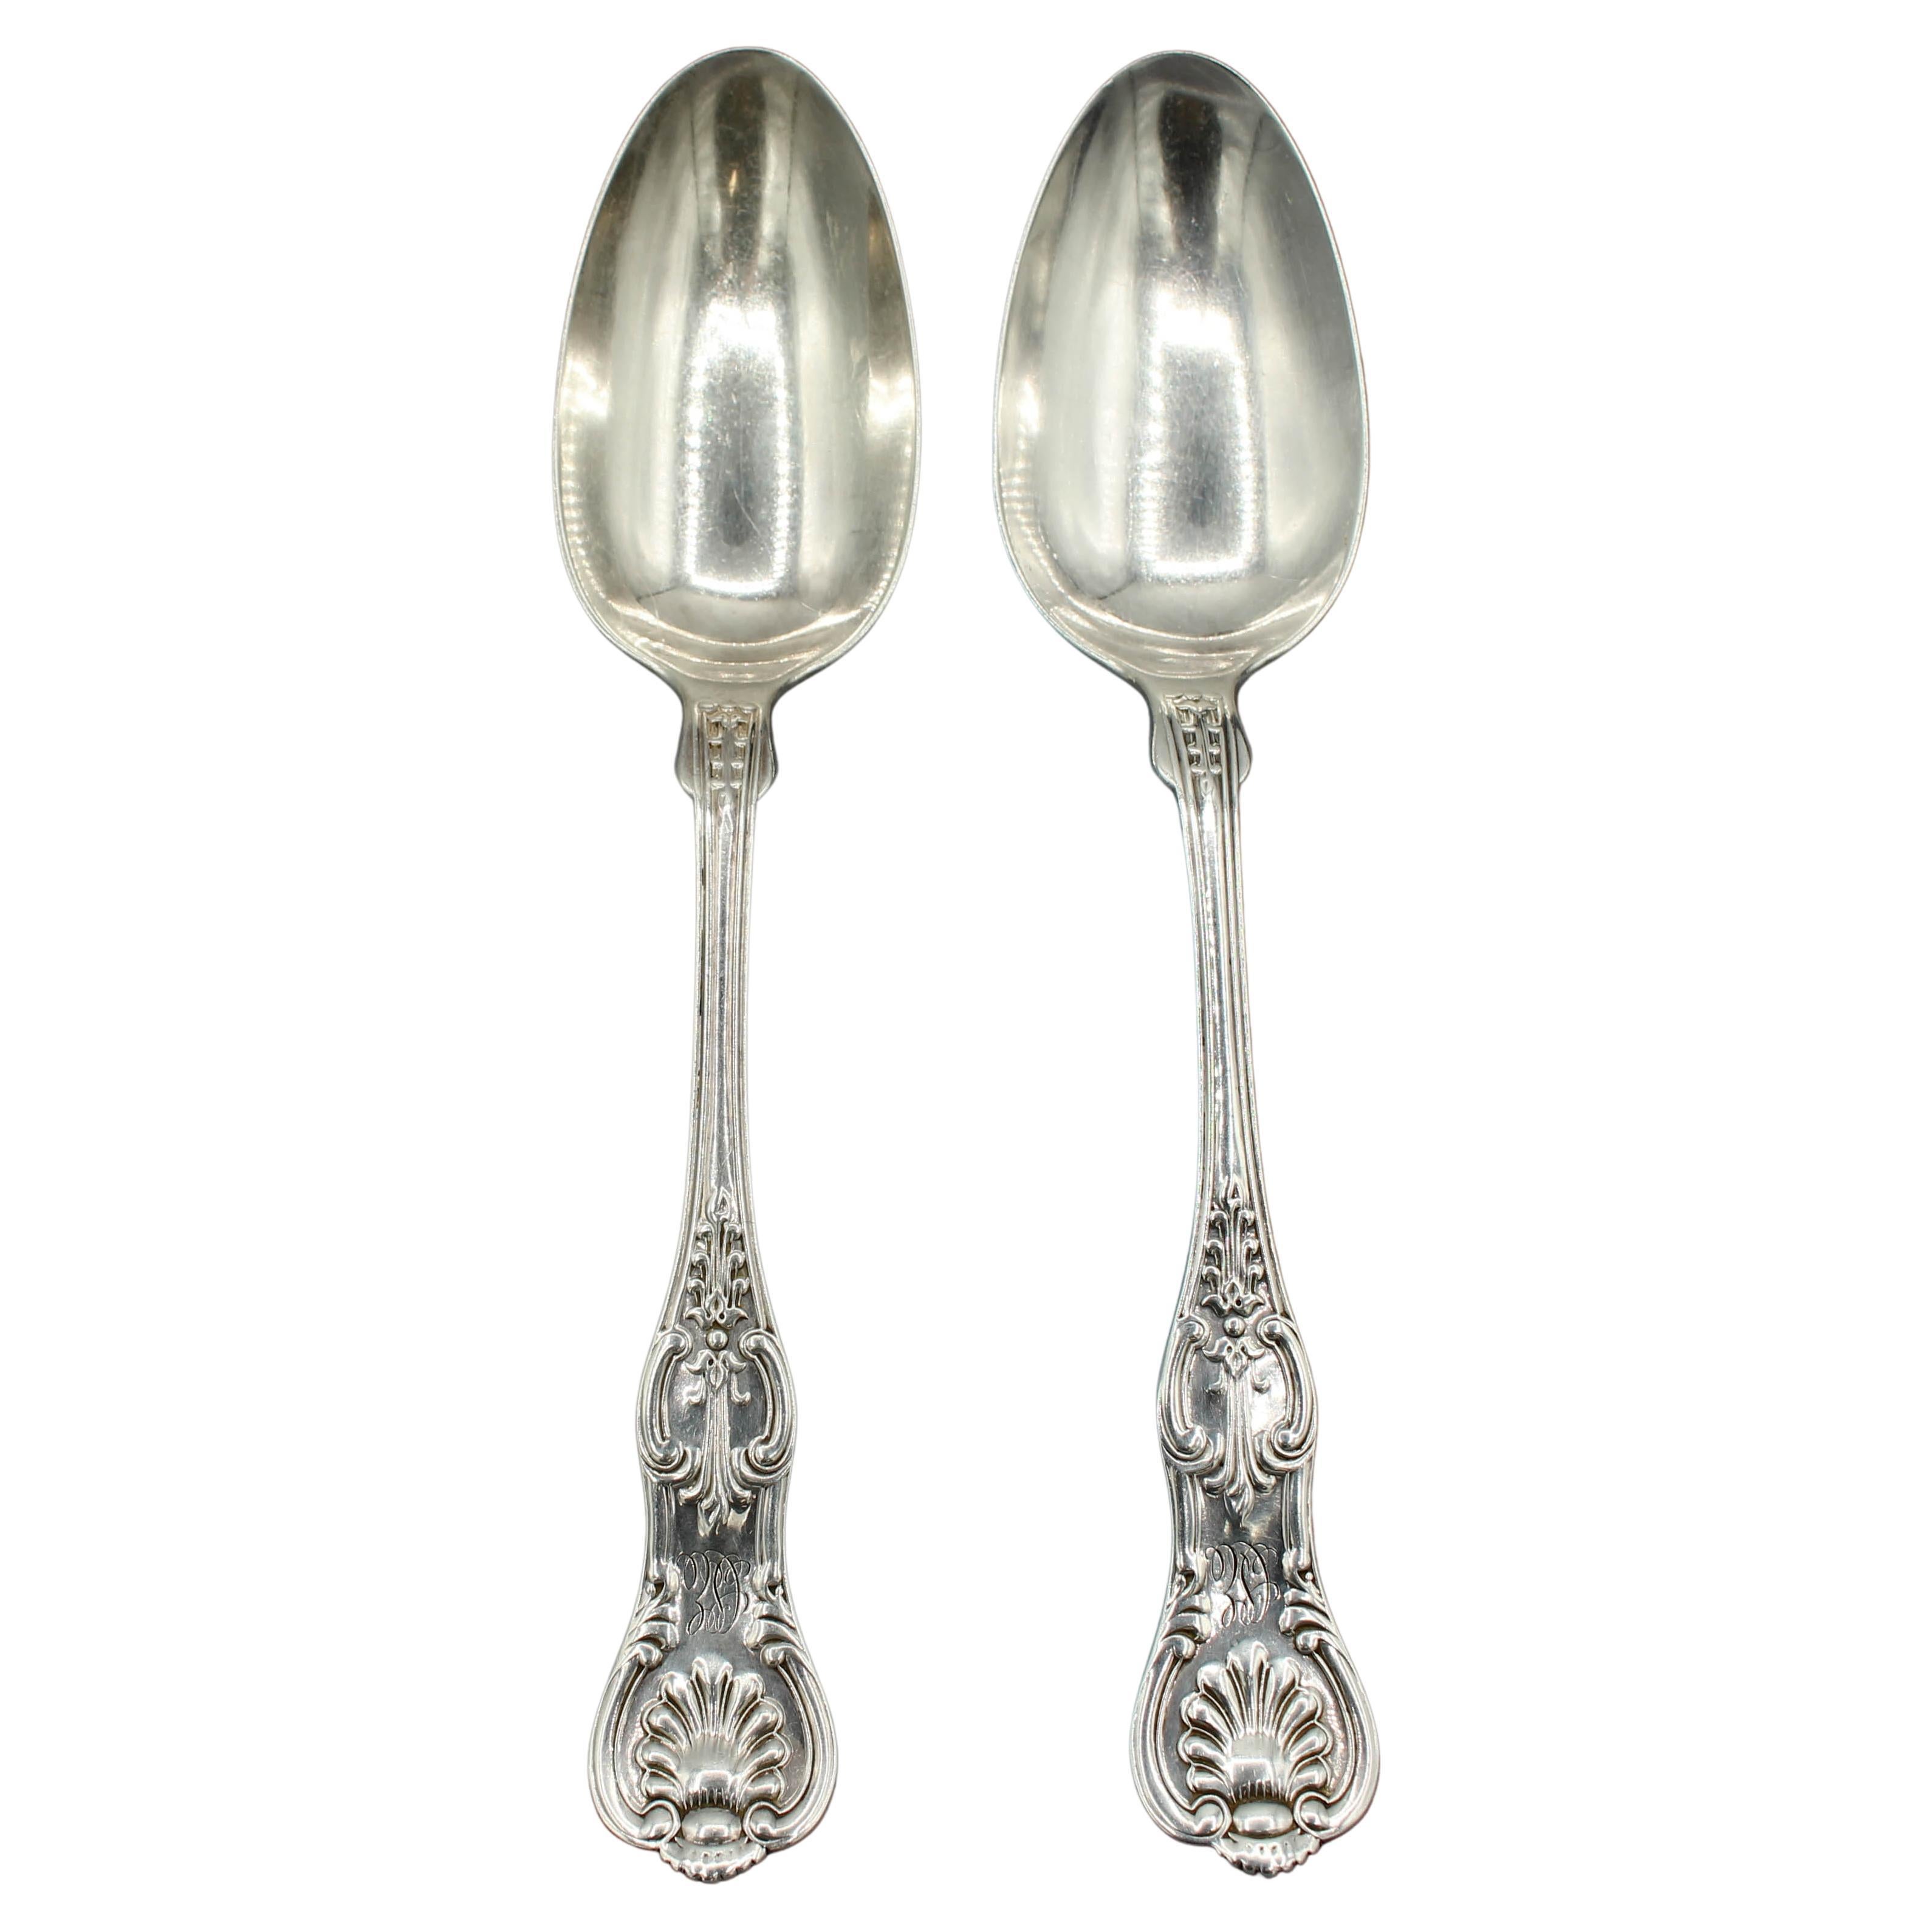 Late 19th Century Pair of "King" Pattern Sterling Silver Spoons